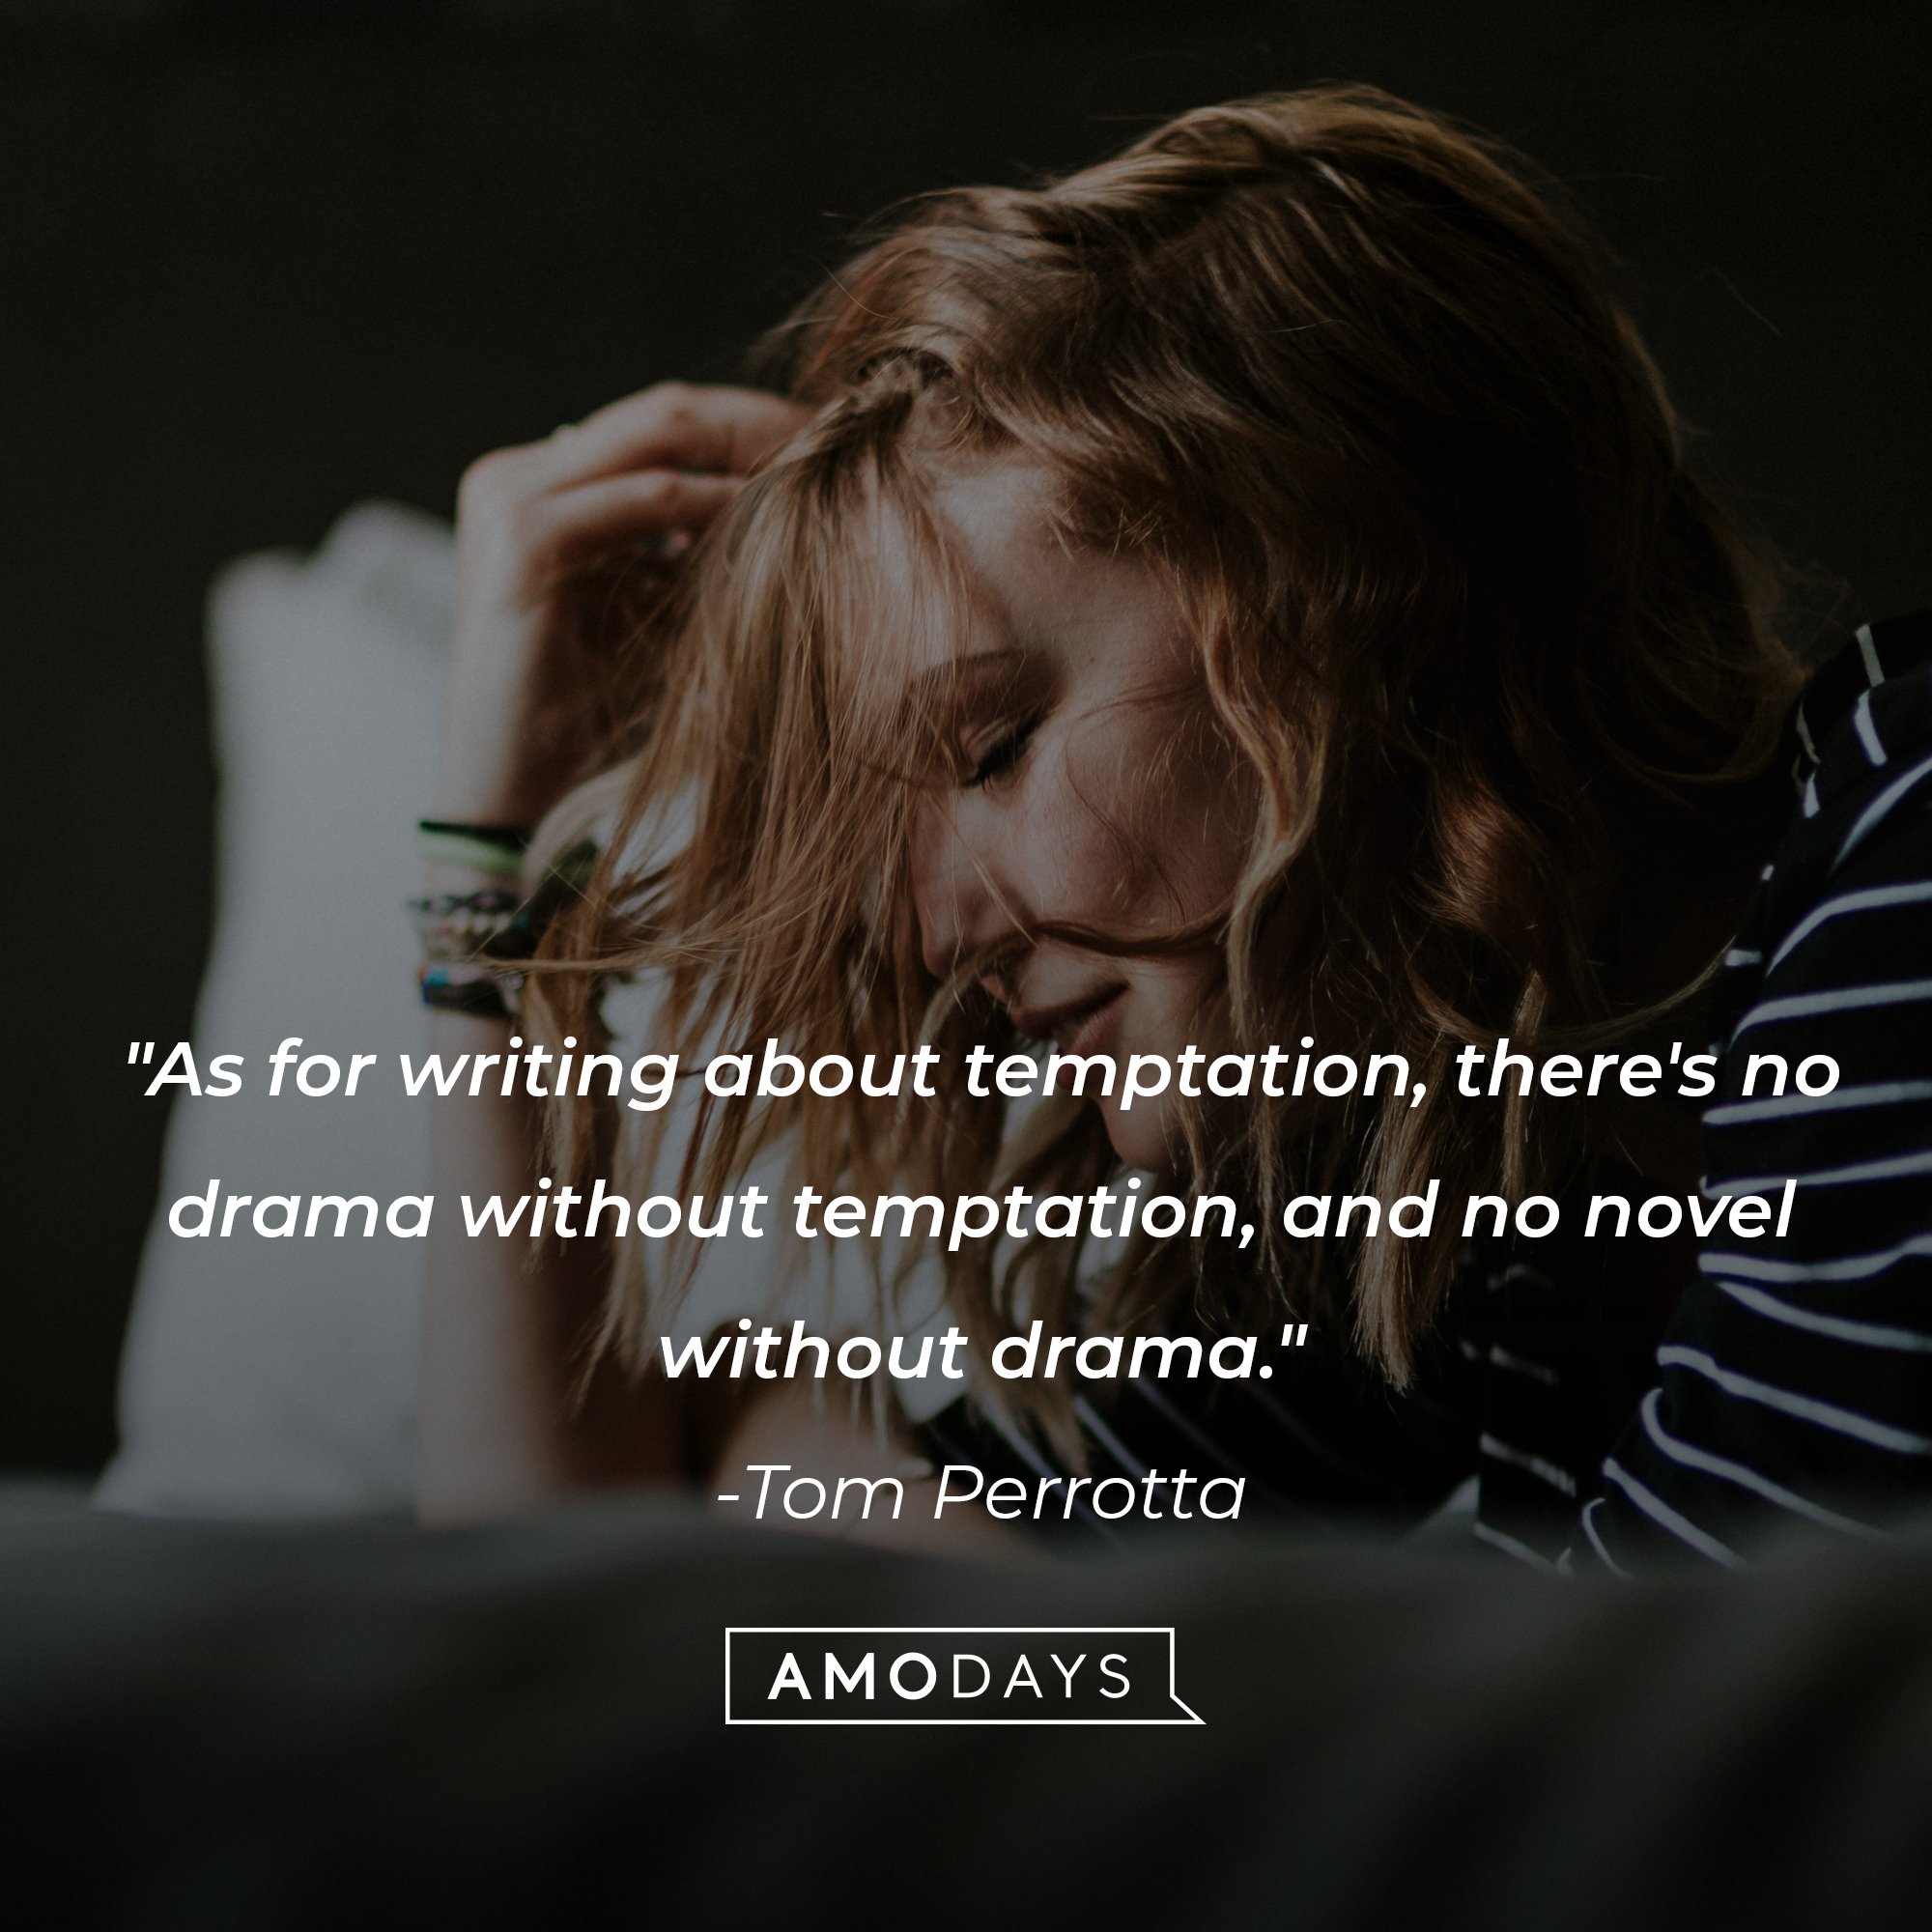 Tom Perrotta’s quote: "As for writing about temptation, there's no drama without temptation and no novel without drama." | Image: AmoDays 